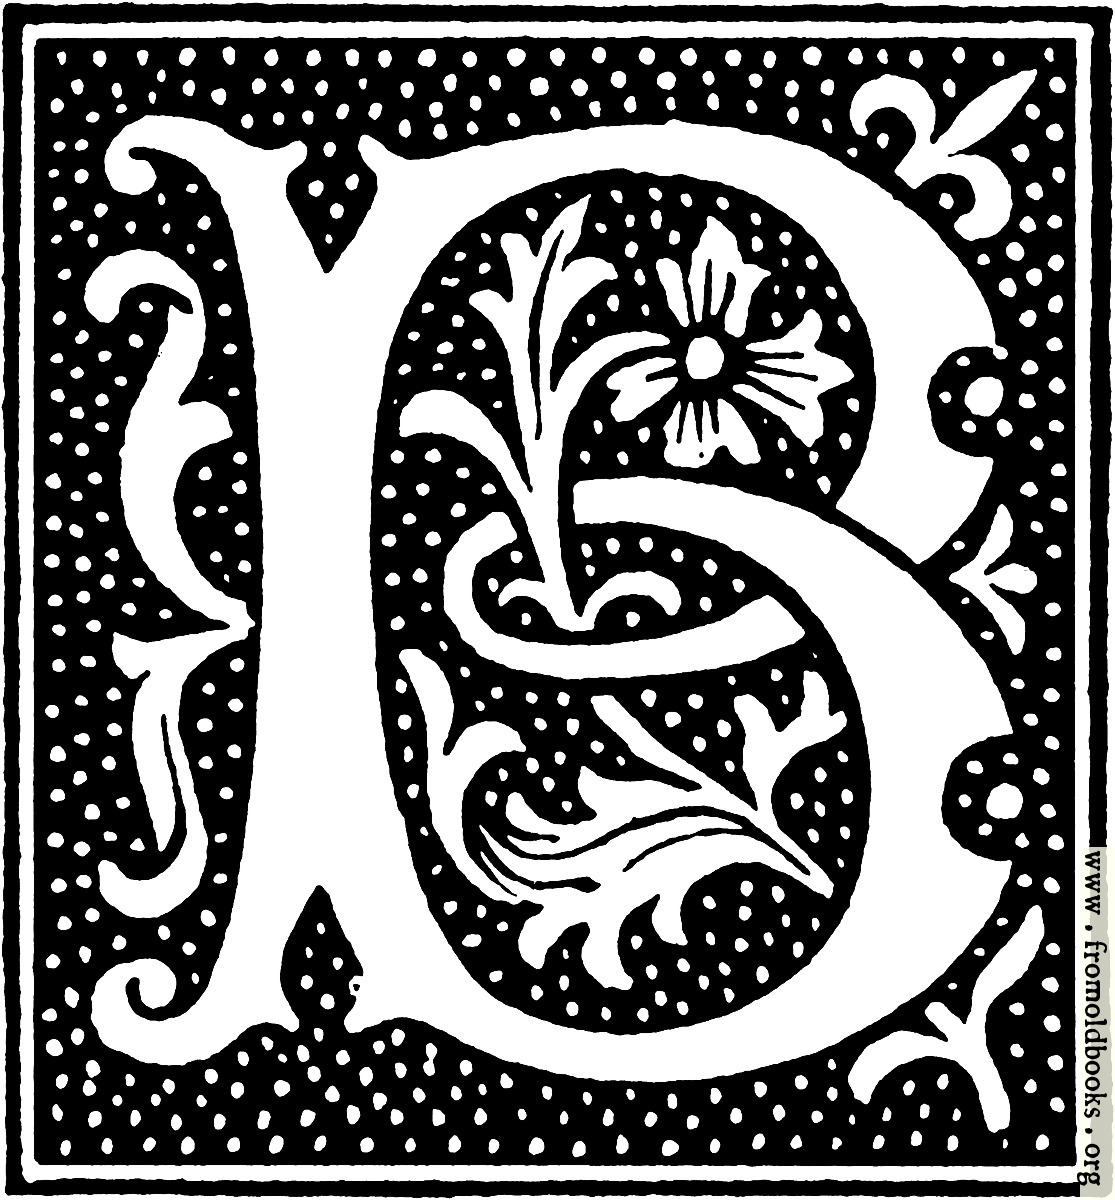 [Picture: clipart: initial letter B from beginning of the 16th Century]